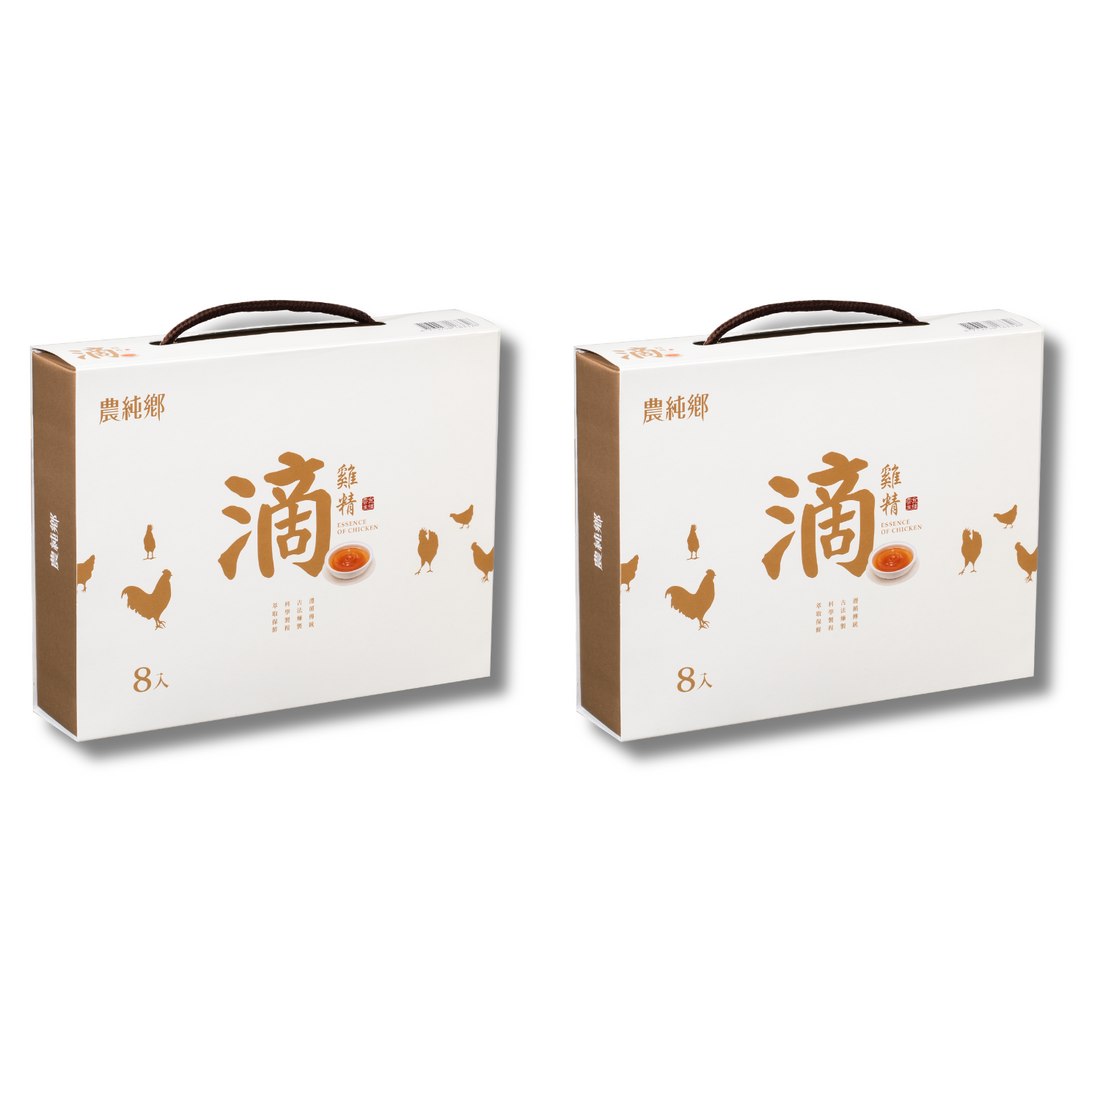 Nong Chun Xiang Chicken Essence x 2 packs【Two weeks Confinement】